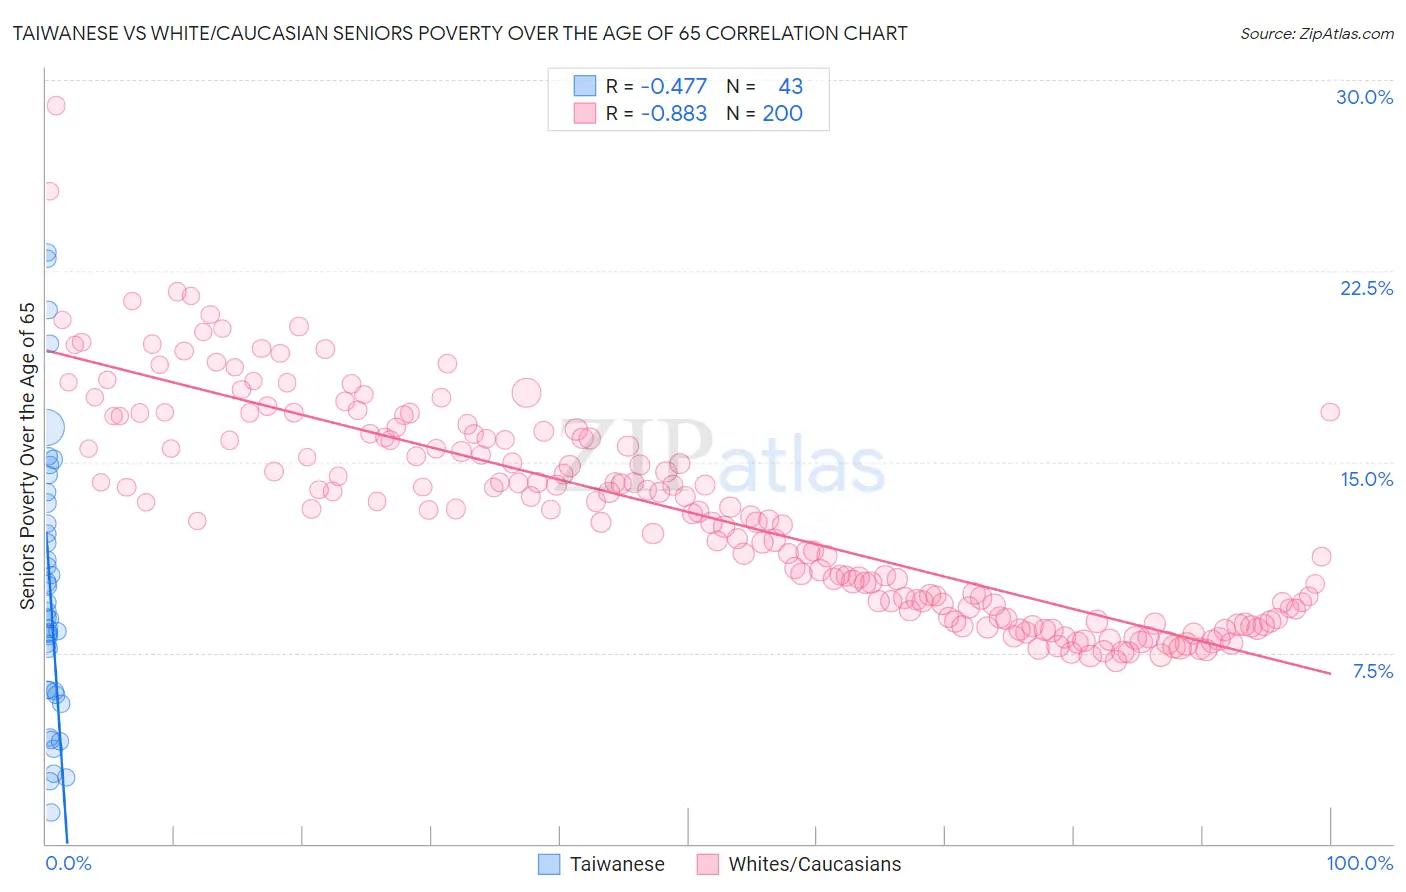 Taiwanese vs White/Caucasian Seniors Poverty Over the Age of 65